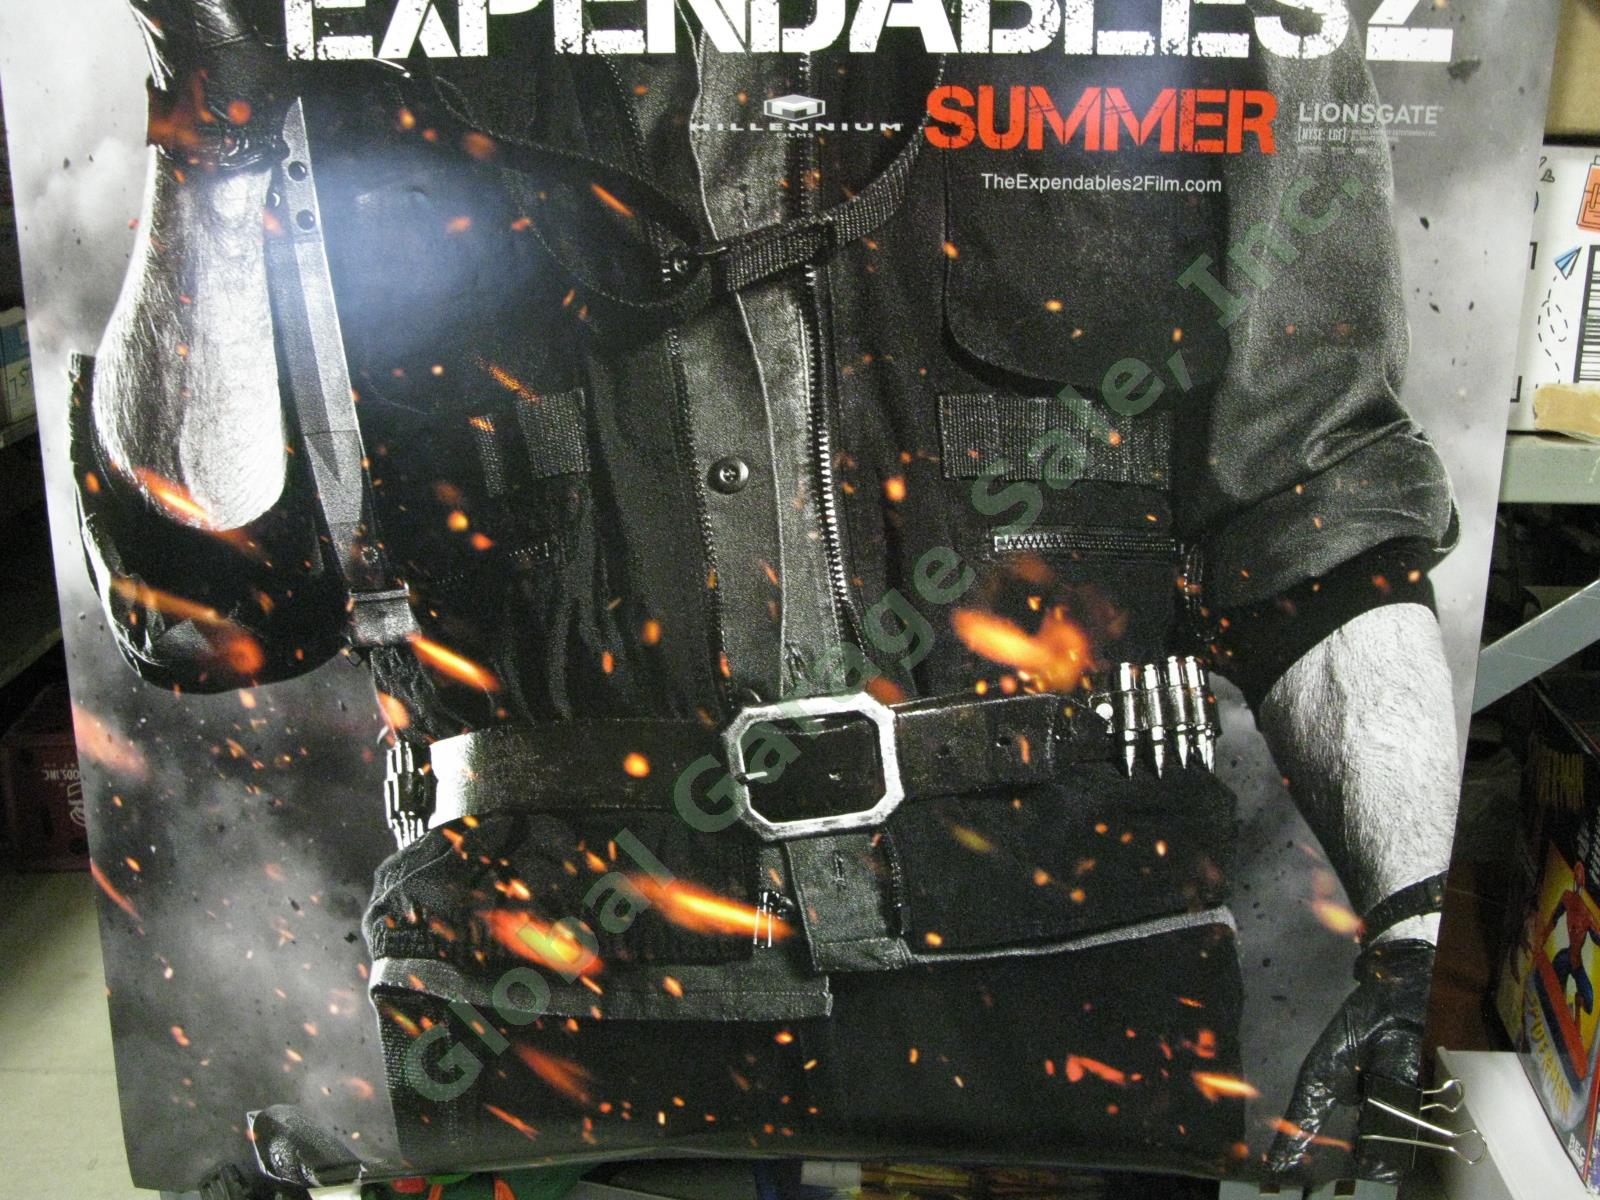 Expendables 2 Chuck Norris Booker Original Movie Theater Lobby Display Poster 2